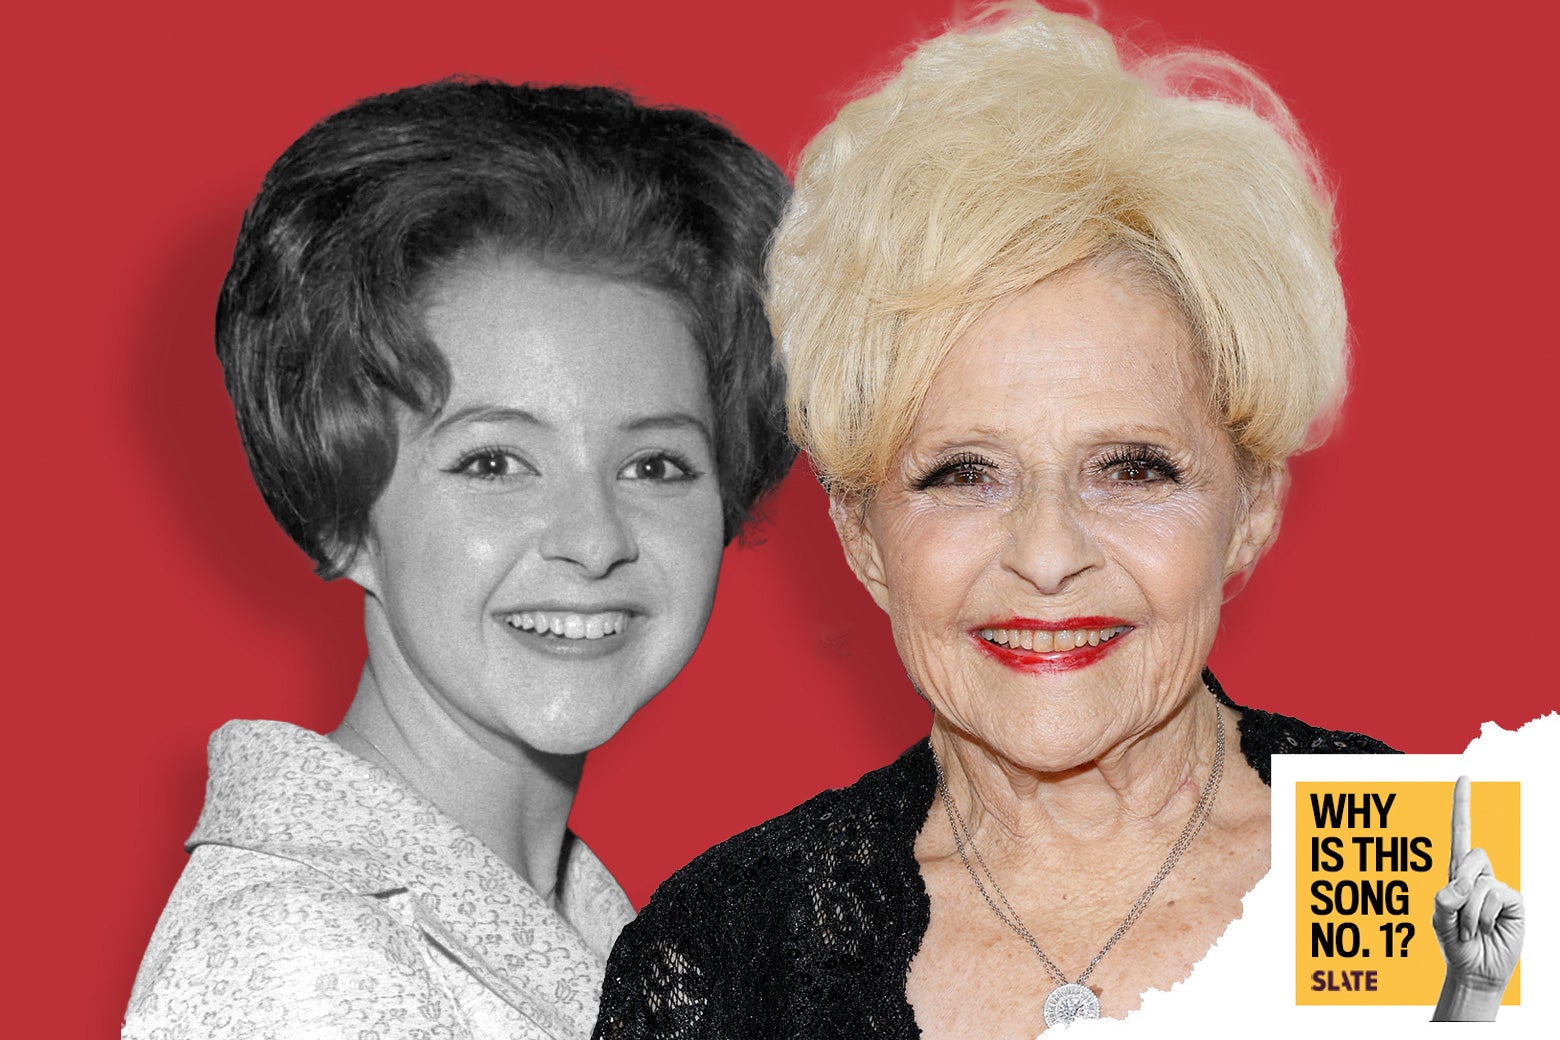 On the left, against a red backdrop, a black-and-white photo of a young girl smiling in a shiny blazer and a very '60s up hairdo. On the right, a color photo of an older woman with bleach-blonde hair smiling wide with bright red lipstick and a still pretty '60s hairdo. In the bottom right corner of the image, a logo shows a single finger point up with the text "Why Is This Song No. 1?"